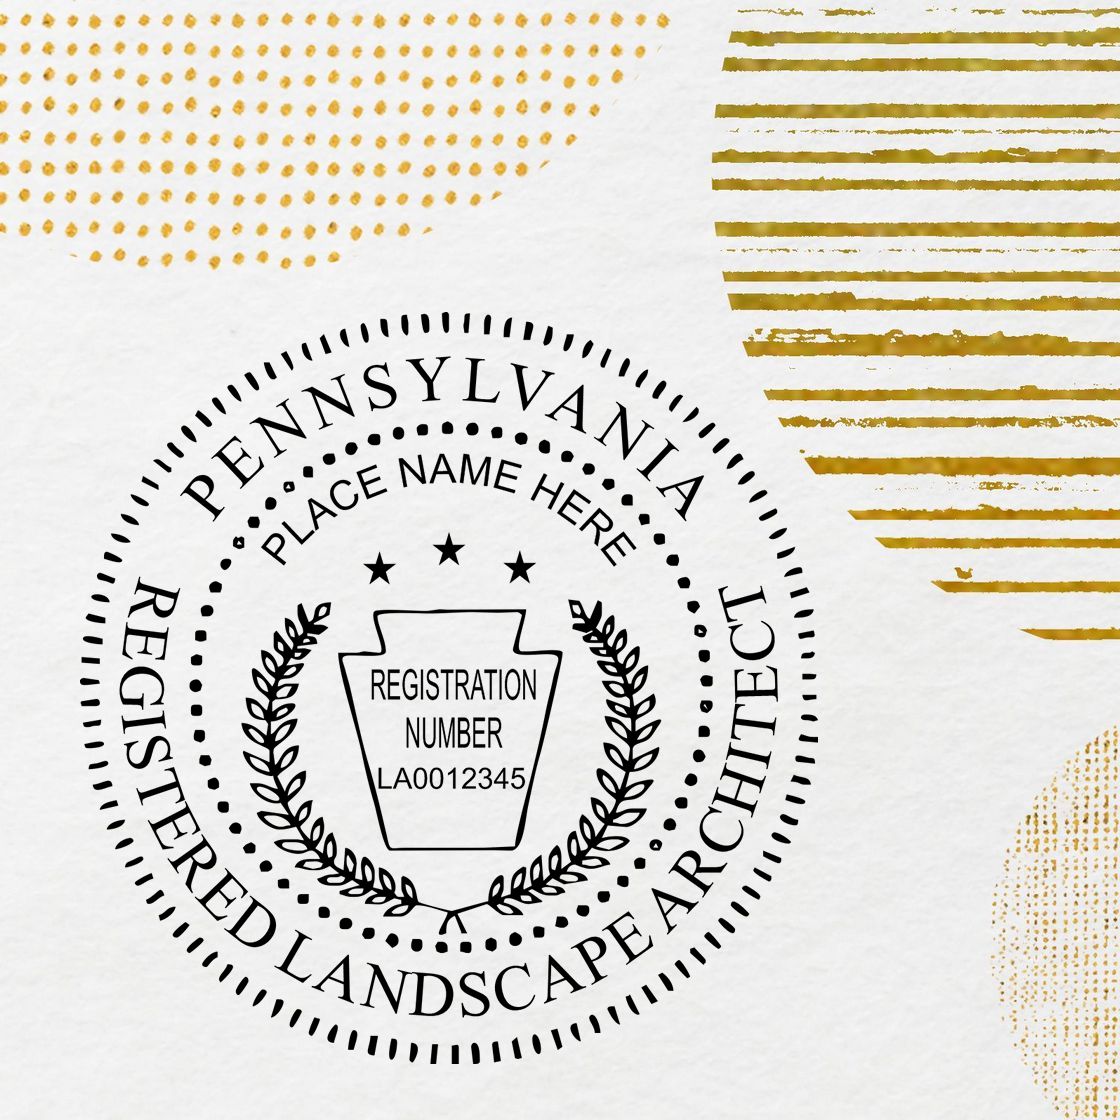 A lifestyle photo showing a stamped image of the Digital Pennsylvania Landscape Architect Stamp on a piece of paper